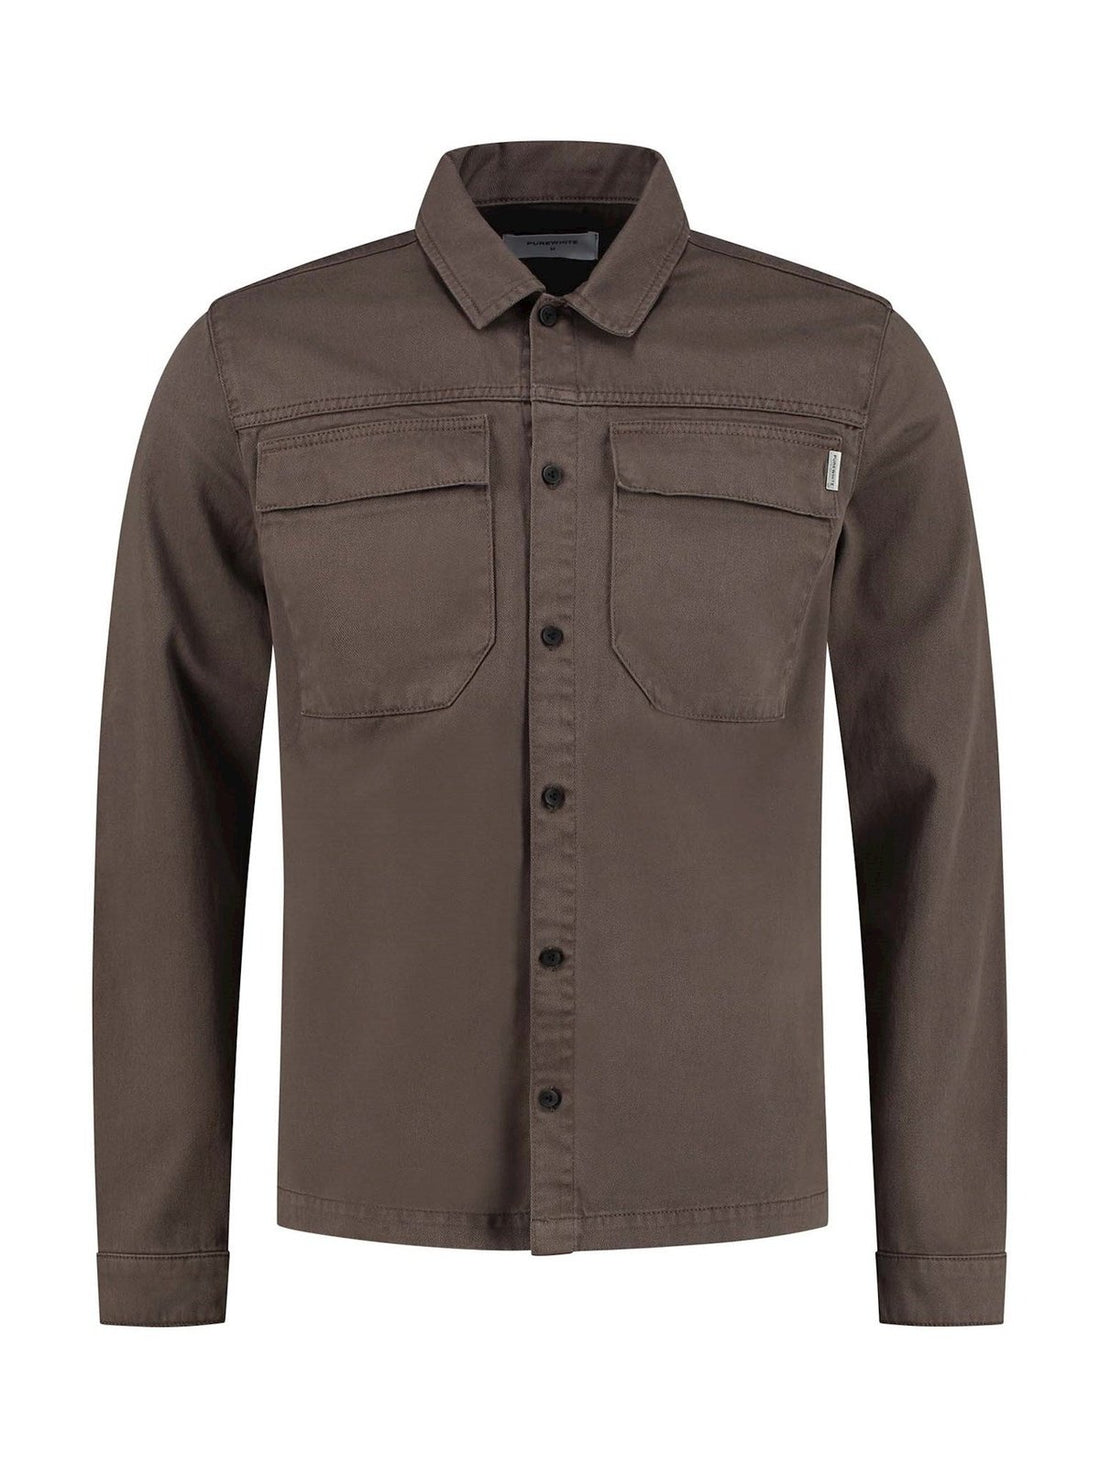 Shirt with front pocket